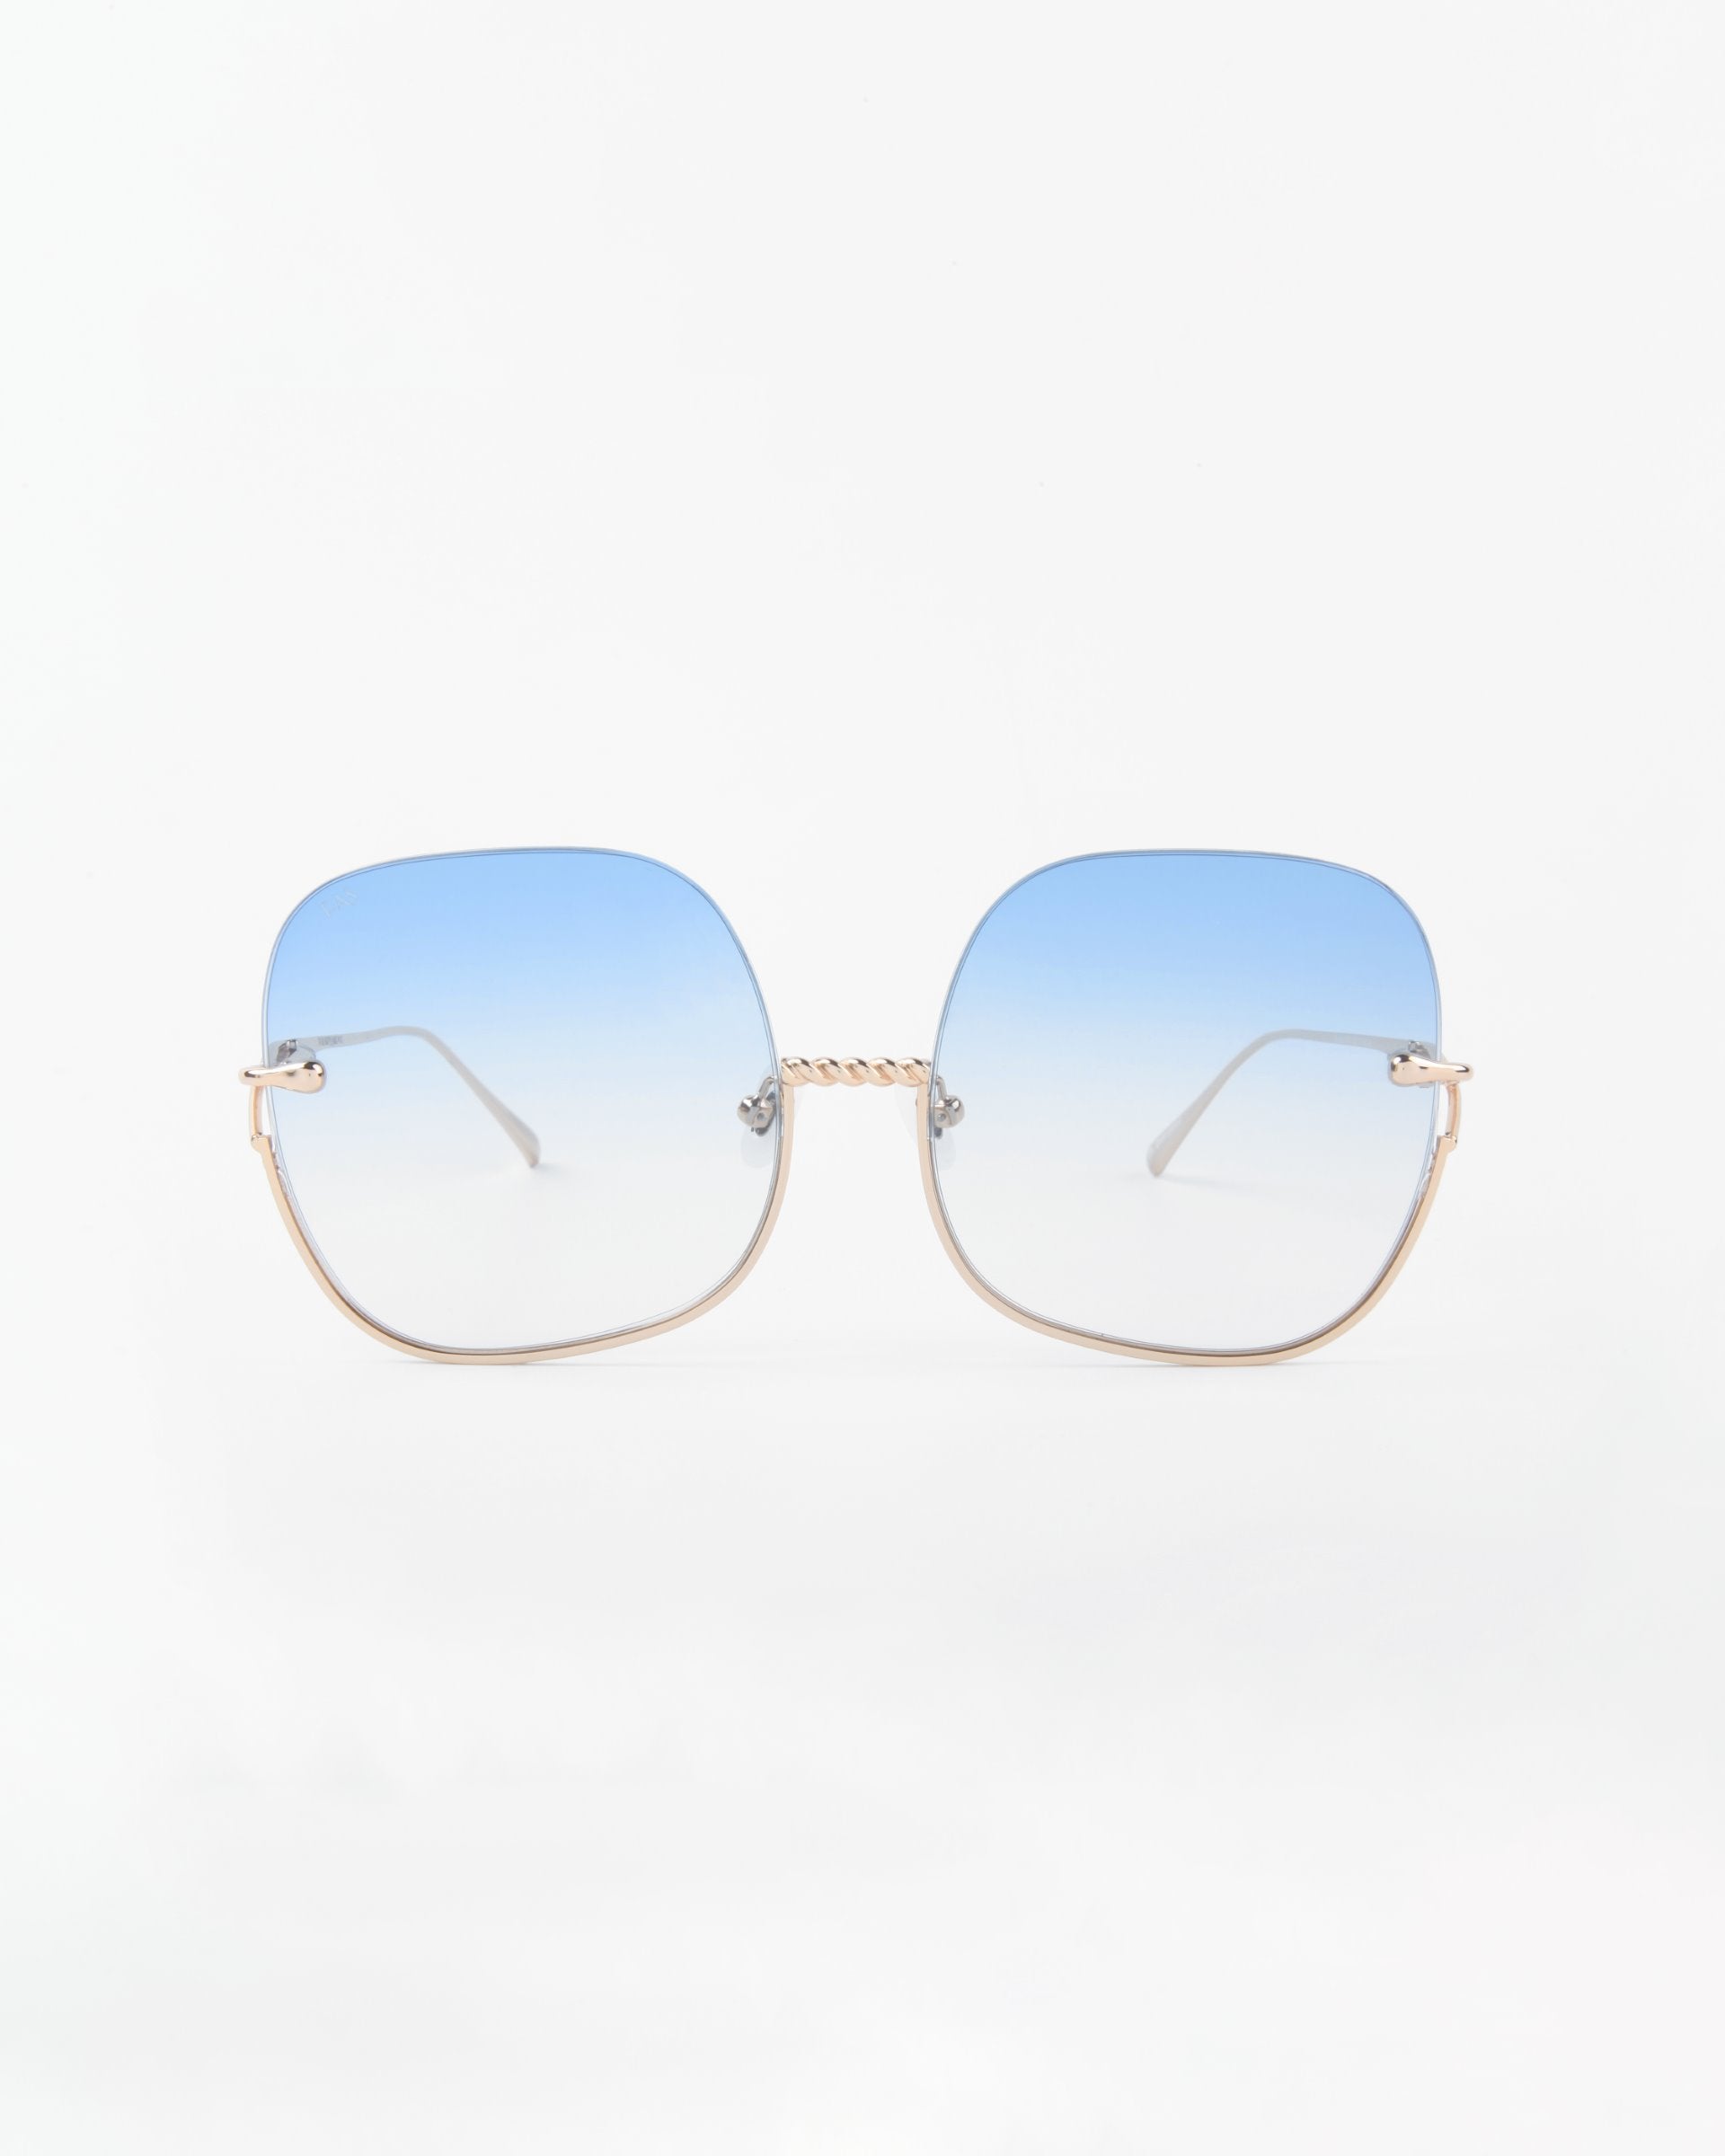 A pair of sunglasses with large, square, shatter-resistant lenses that gradient from blue at the top to clear at the bottom. They feature a handmade gold-plated frame with a delicate twisted design on the nose bridge and slim gold temples. The lenses offer UVA &amp; UVB protection. The background is plain white. These are the Duchess by For Art&#39;s Sake®.